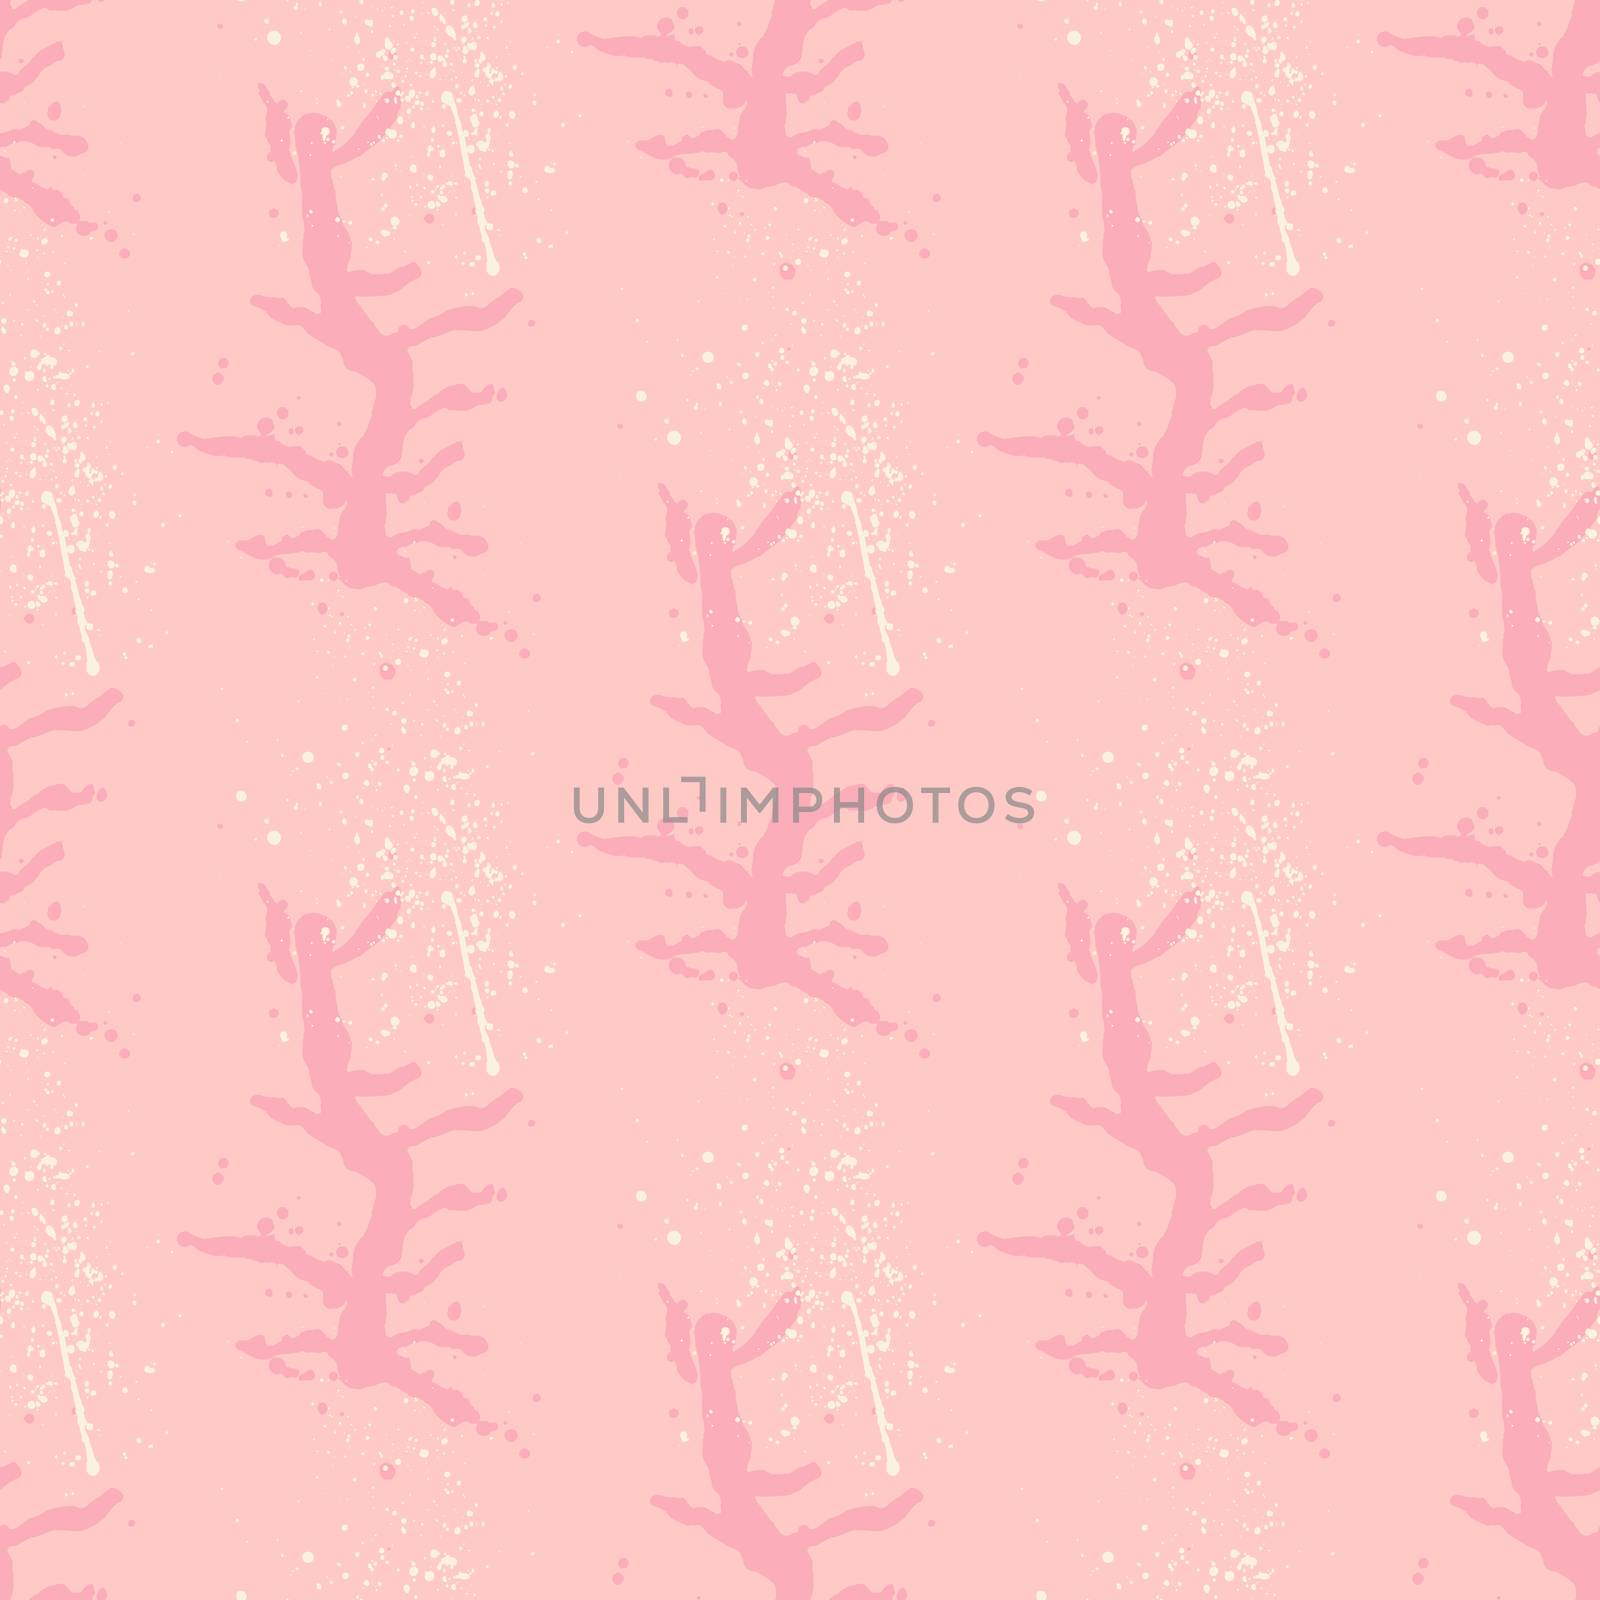 Girly pink sea coral trendy seamless pattern with hand drawn textures background. Design for wrapping paper, wallpaper, fabric print, backdrop. Vector illustration.